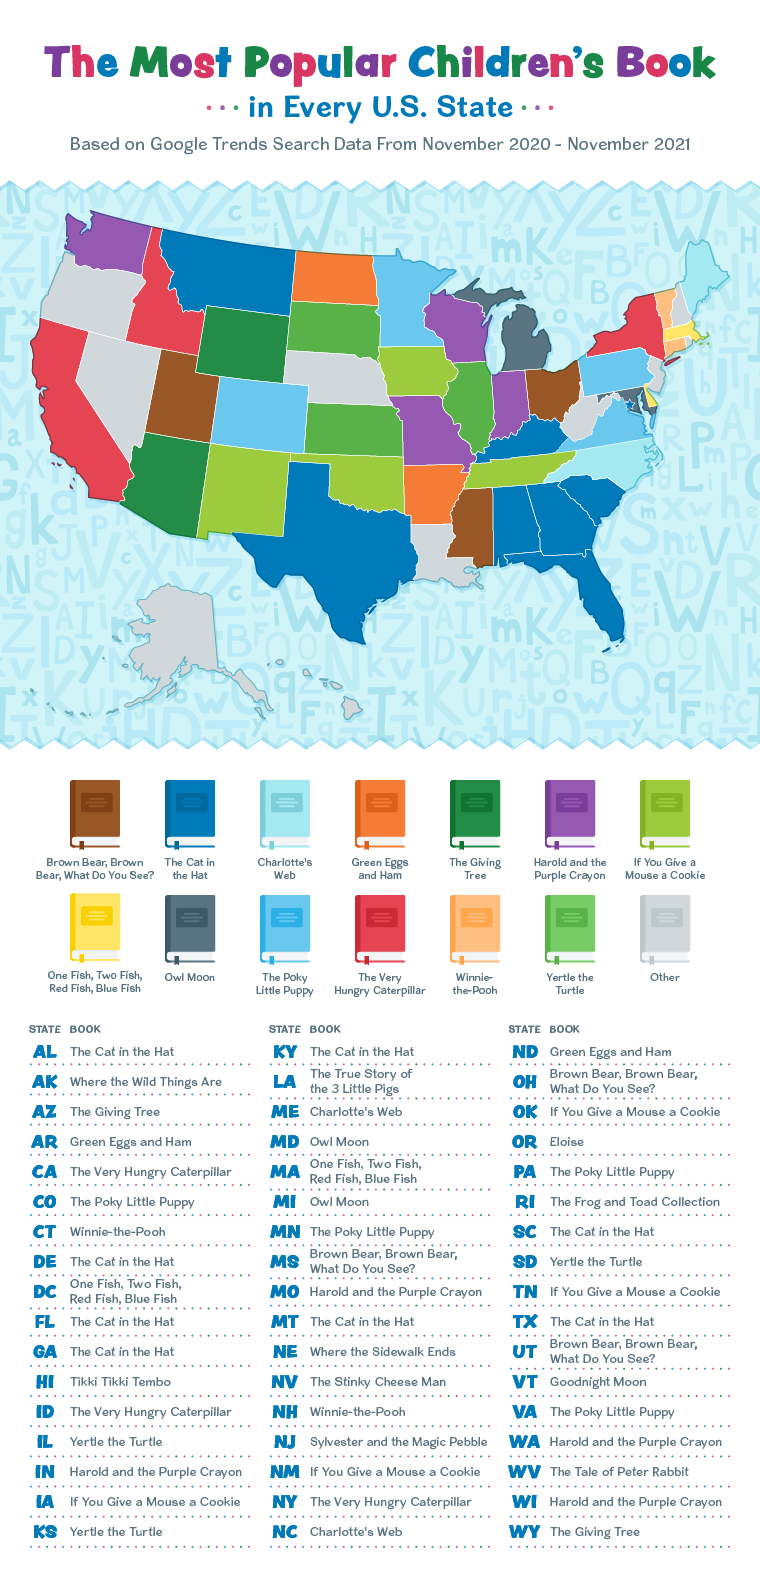 infographic showing the most popular children's book in every U.S. state